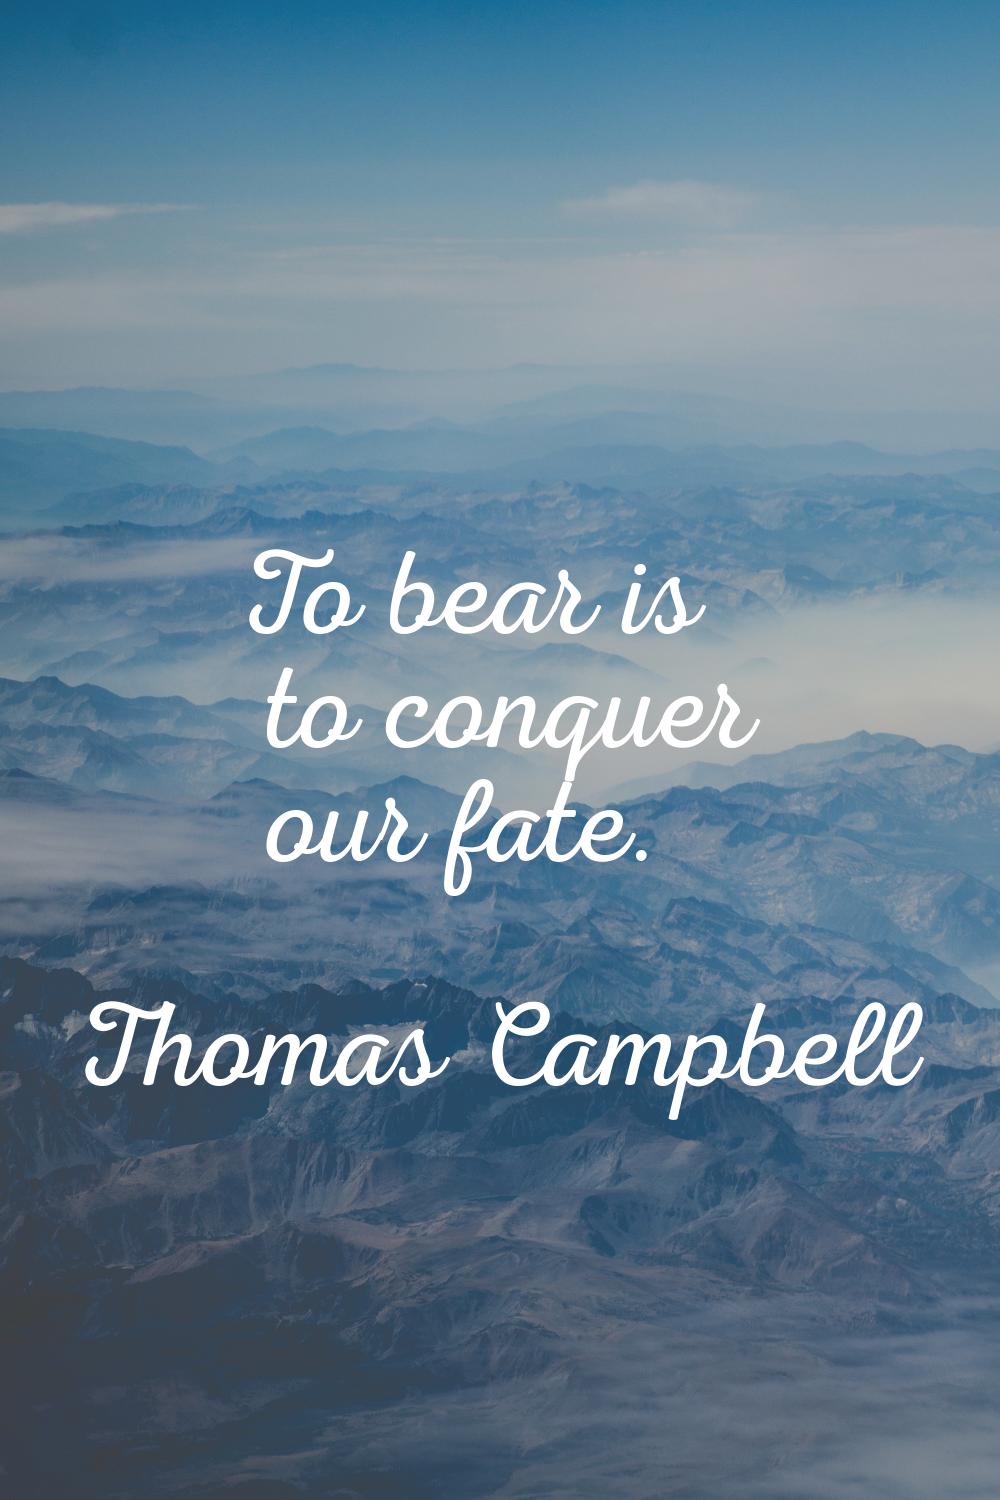 To bear is to conquer our fate.